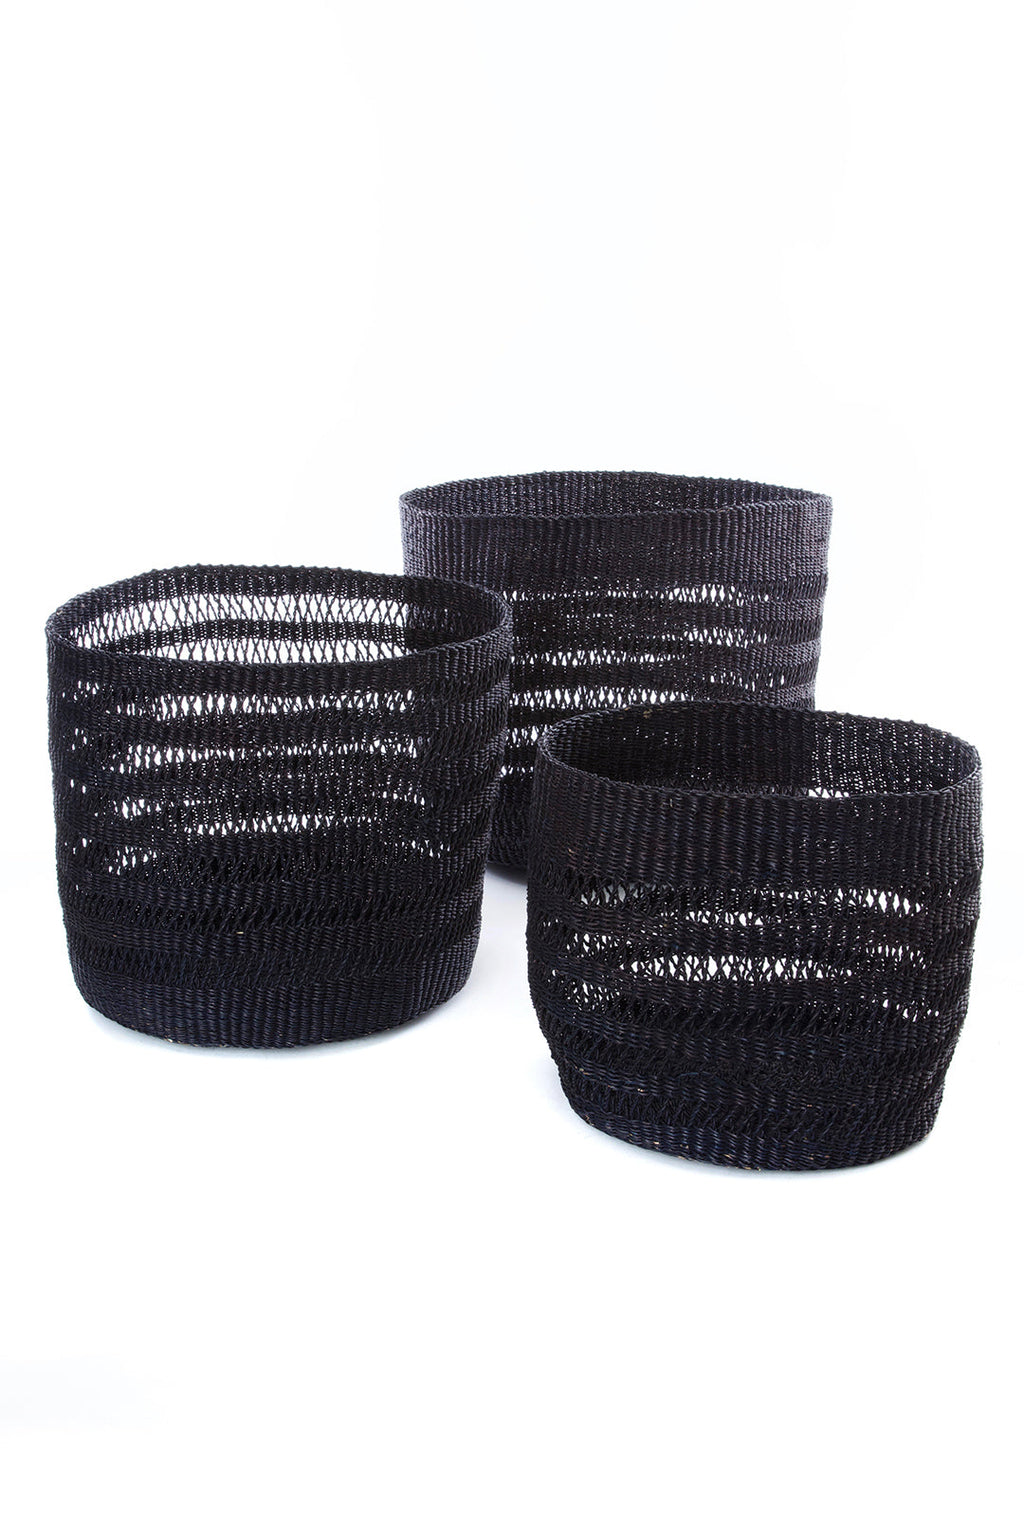 Set of Three Raven Lace Weave Basket Bins from Ghana Swahili, Image